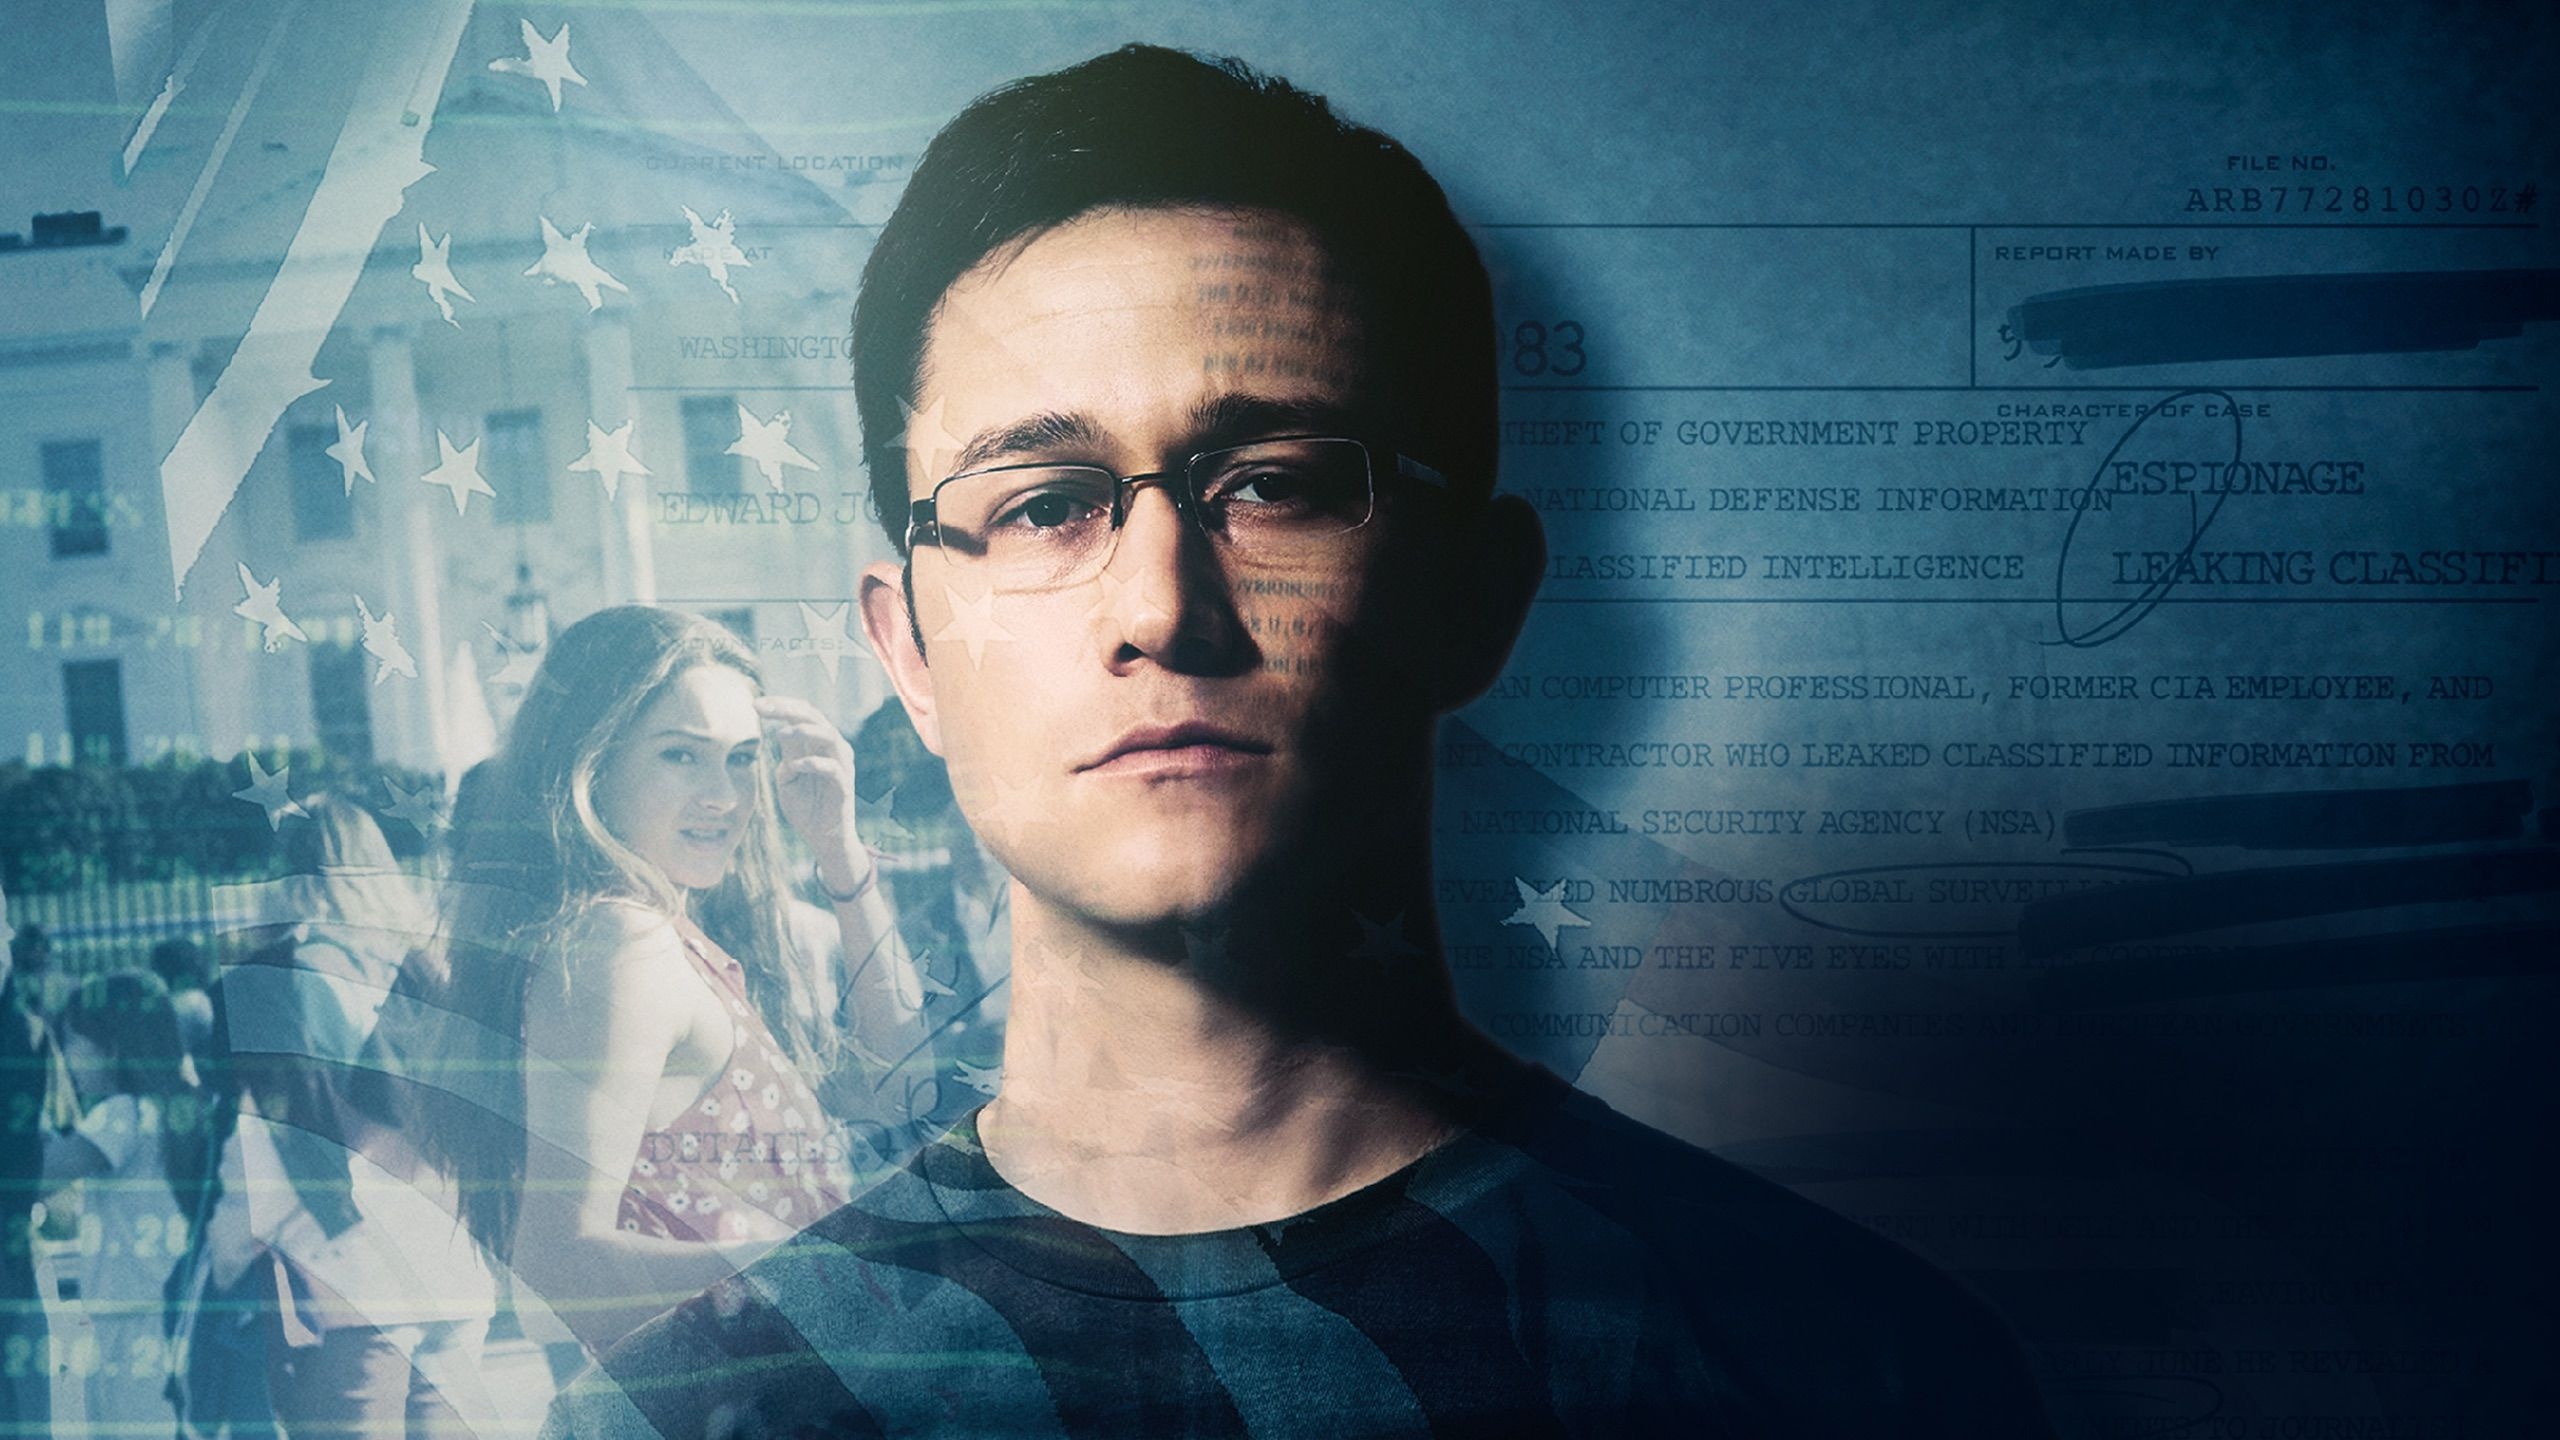 Snowden movie, Movies Anywhere, Online streaming, An immersive viewing experience, 2560x1440 HD Desktop